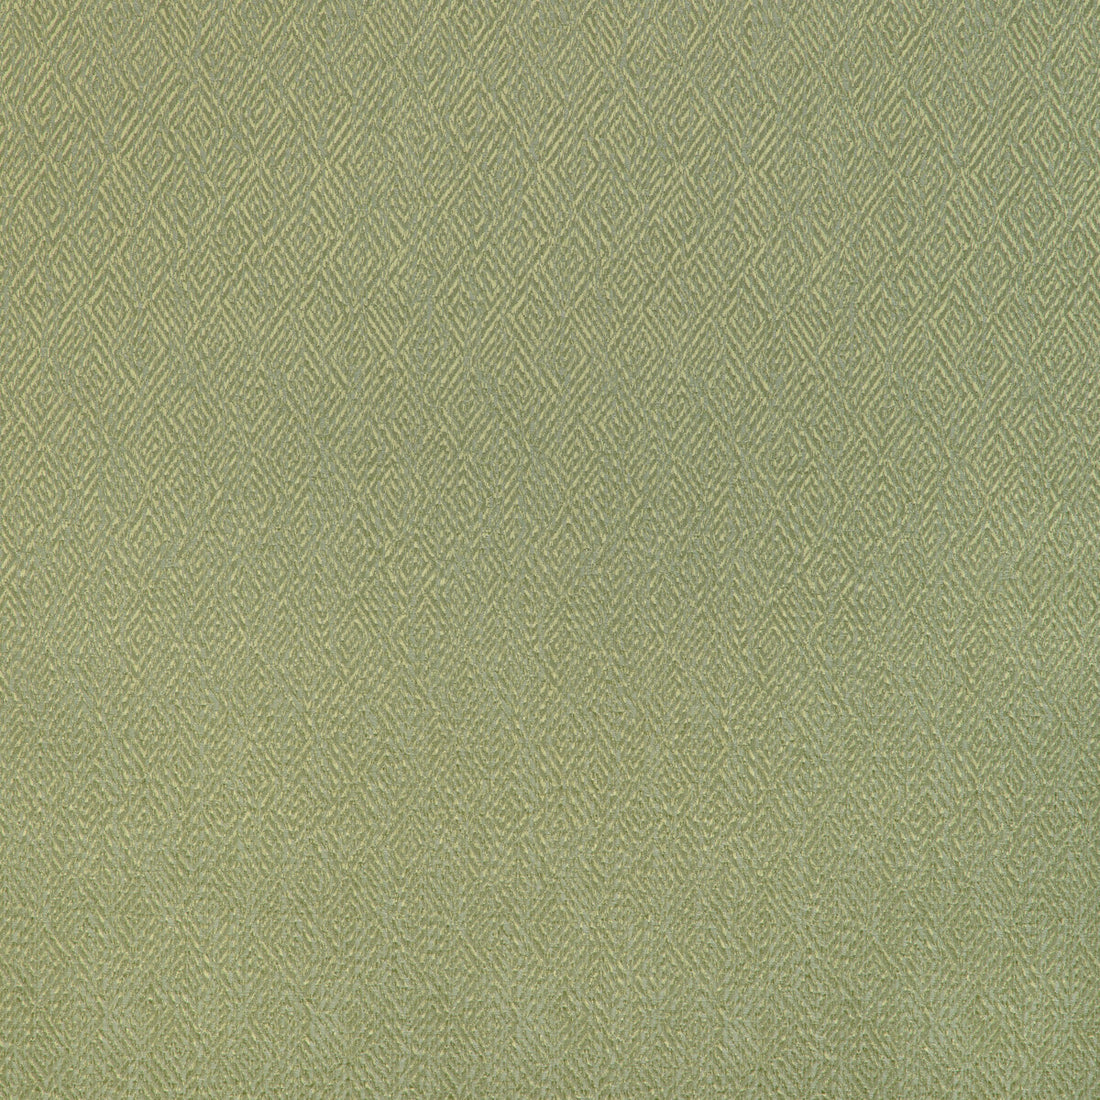 Pipet Texture fabric in leaf color - pattern 8023152.3.0 - by Brunschwig &amp; Fils in the Vienne Silks collection